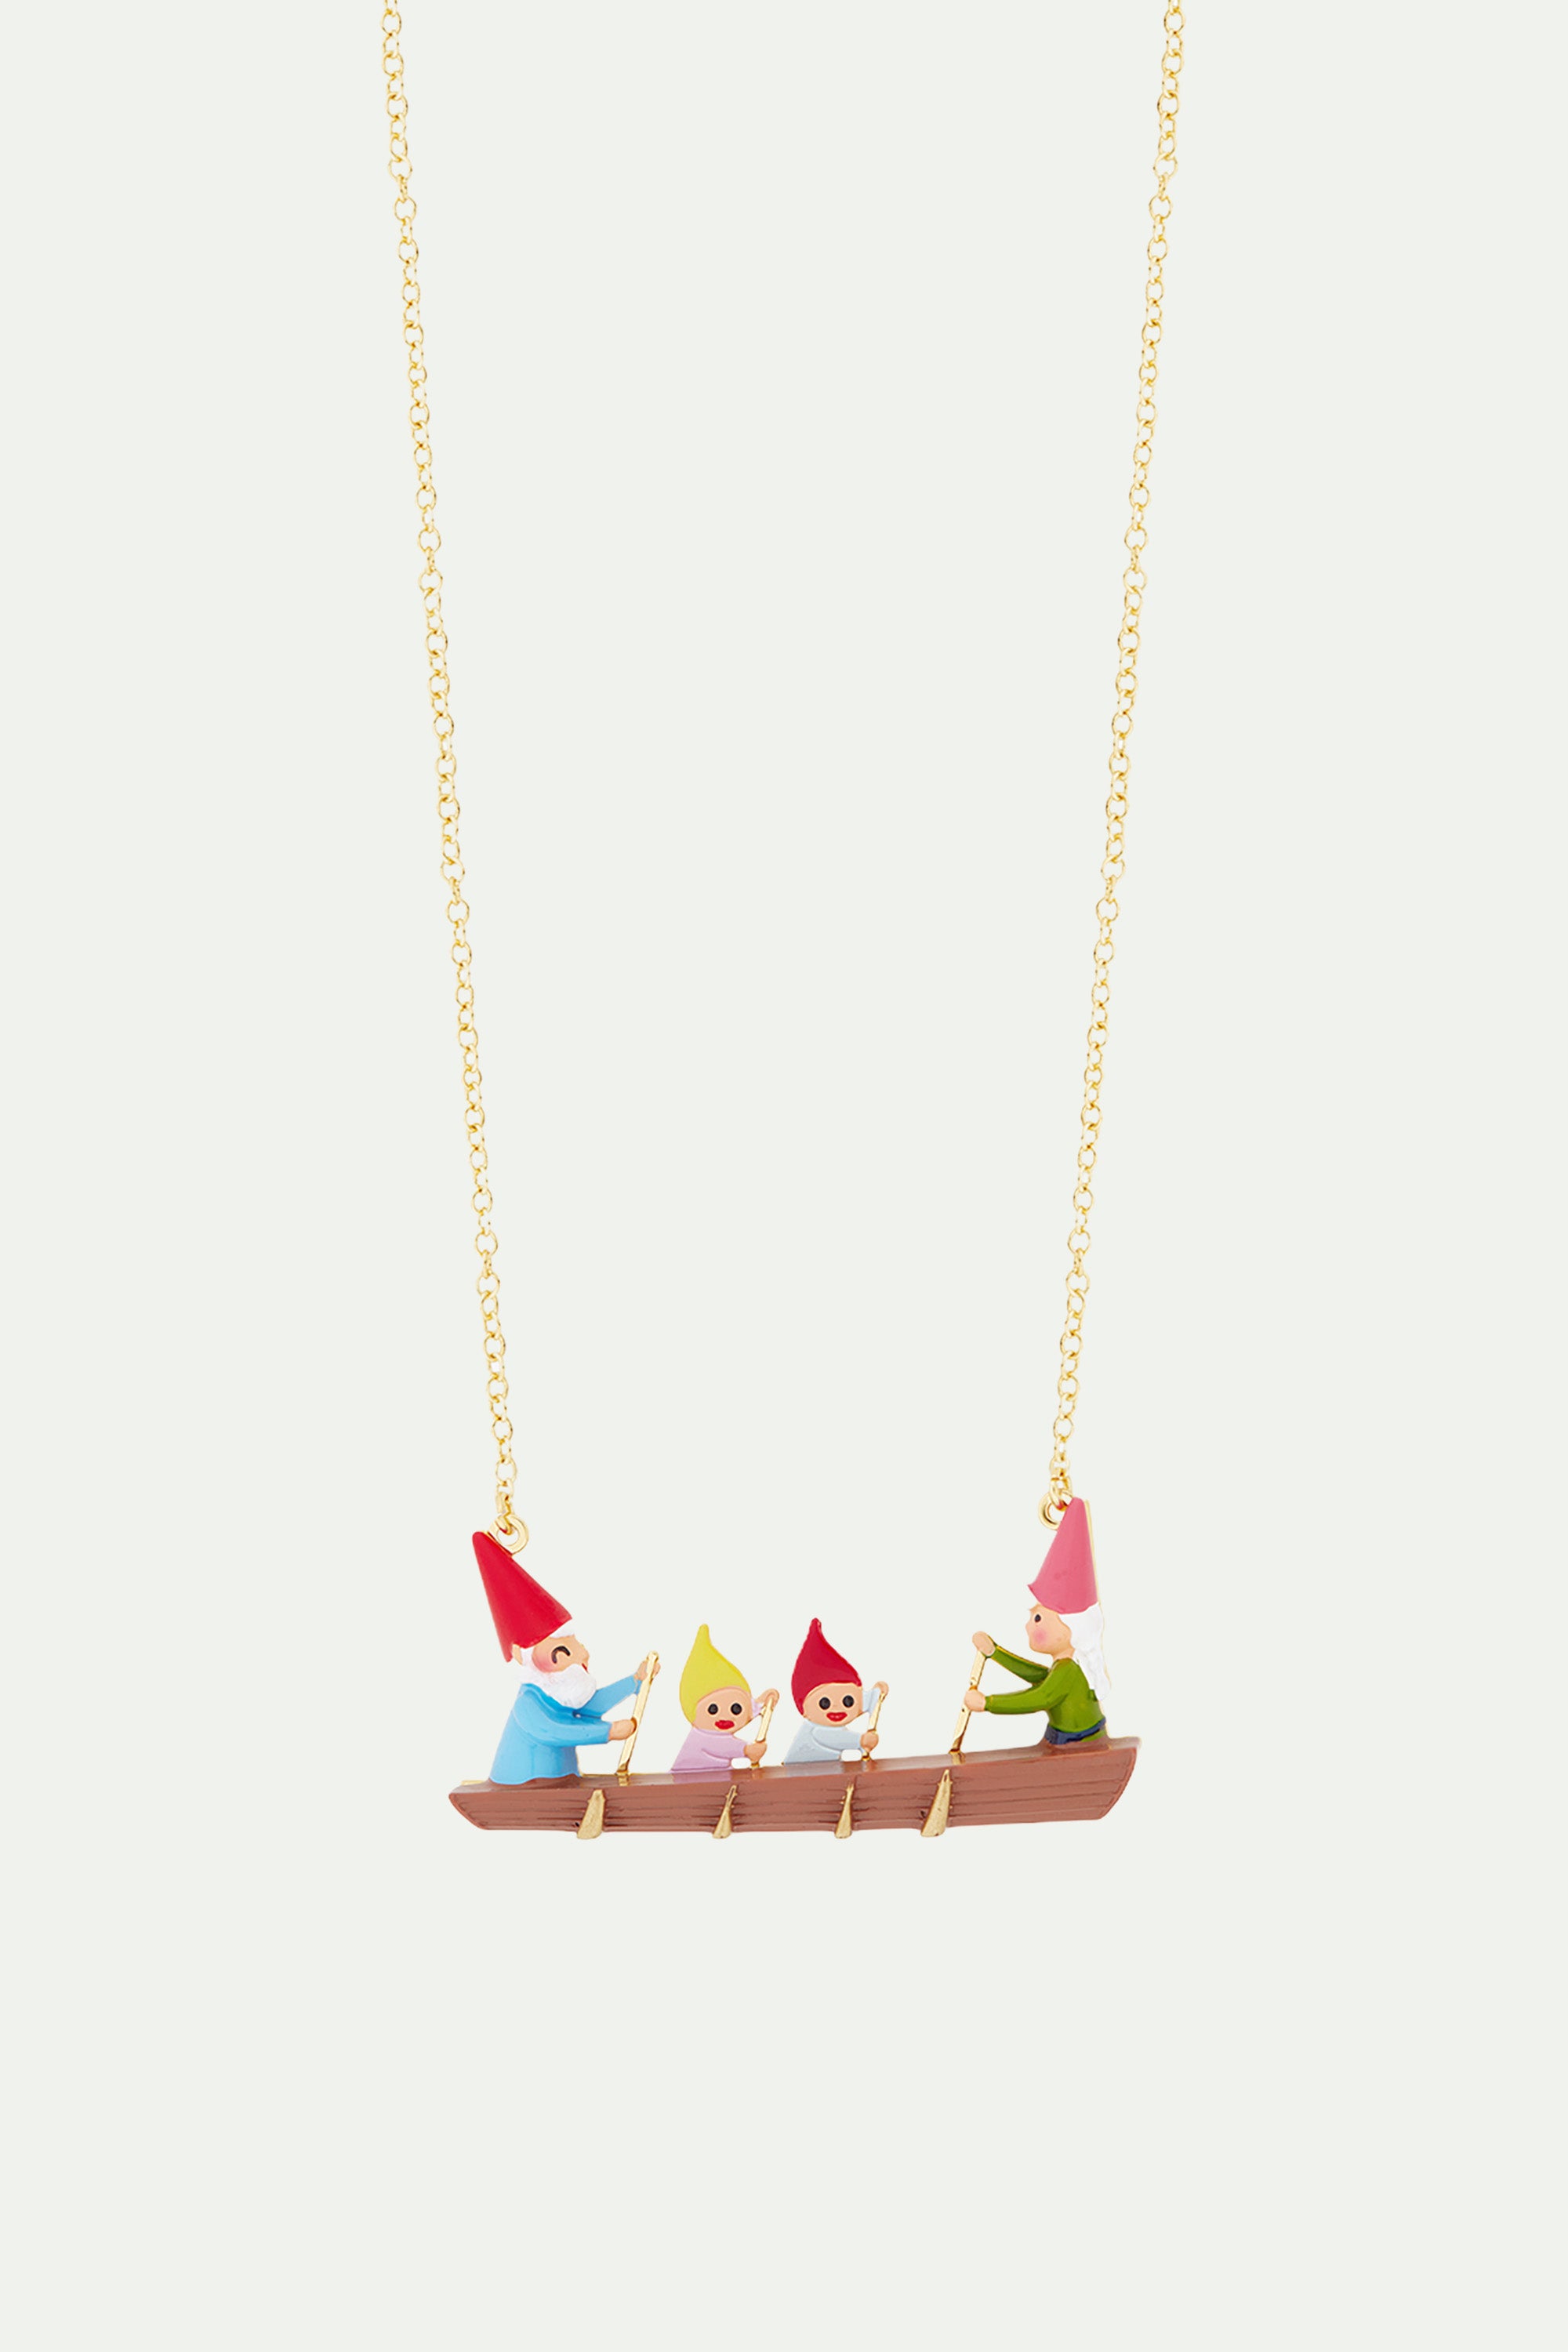 Canoeing Toadstool Family statement necklace